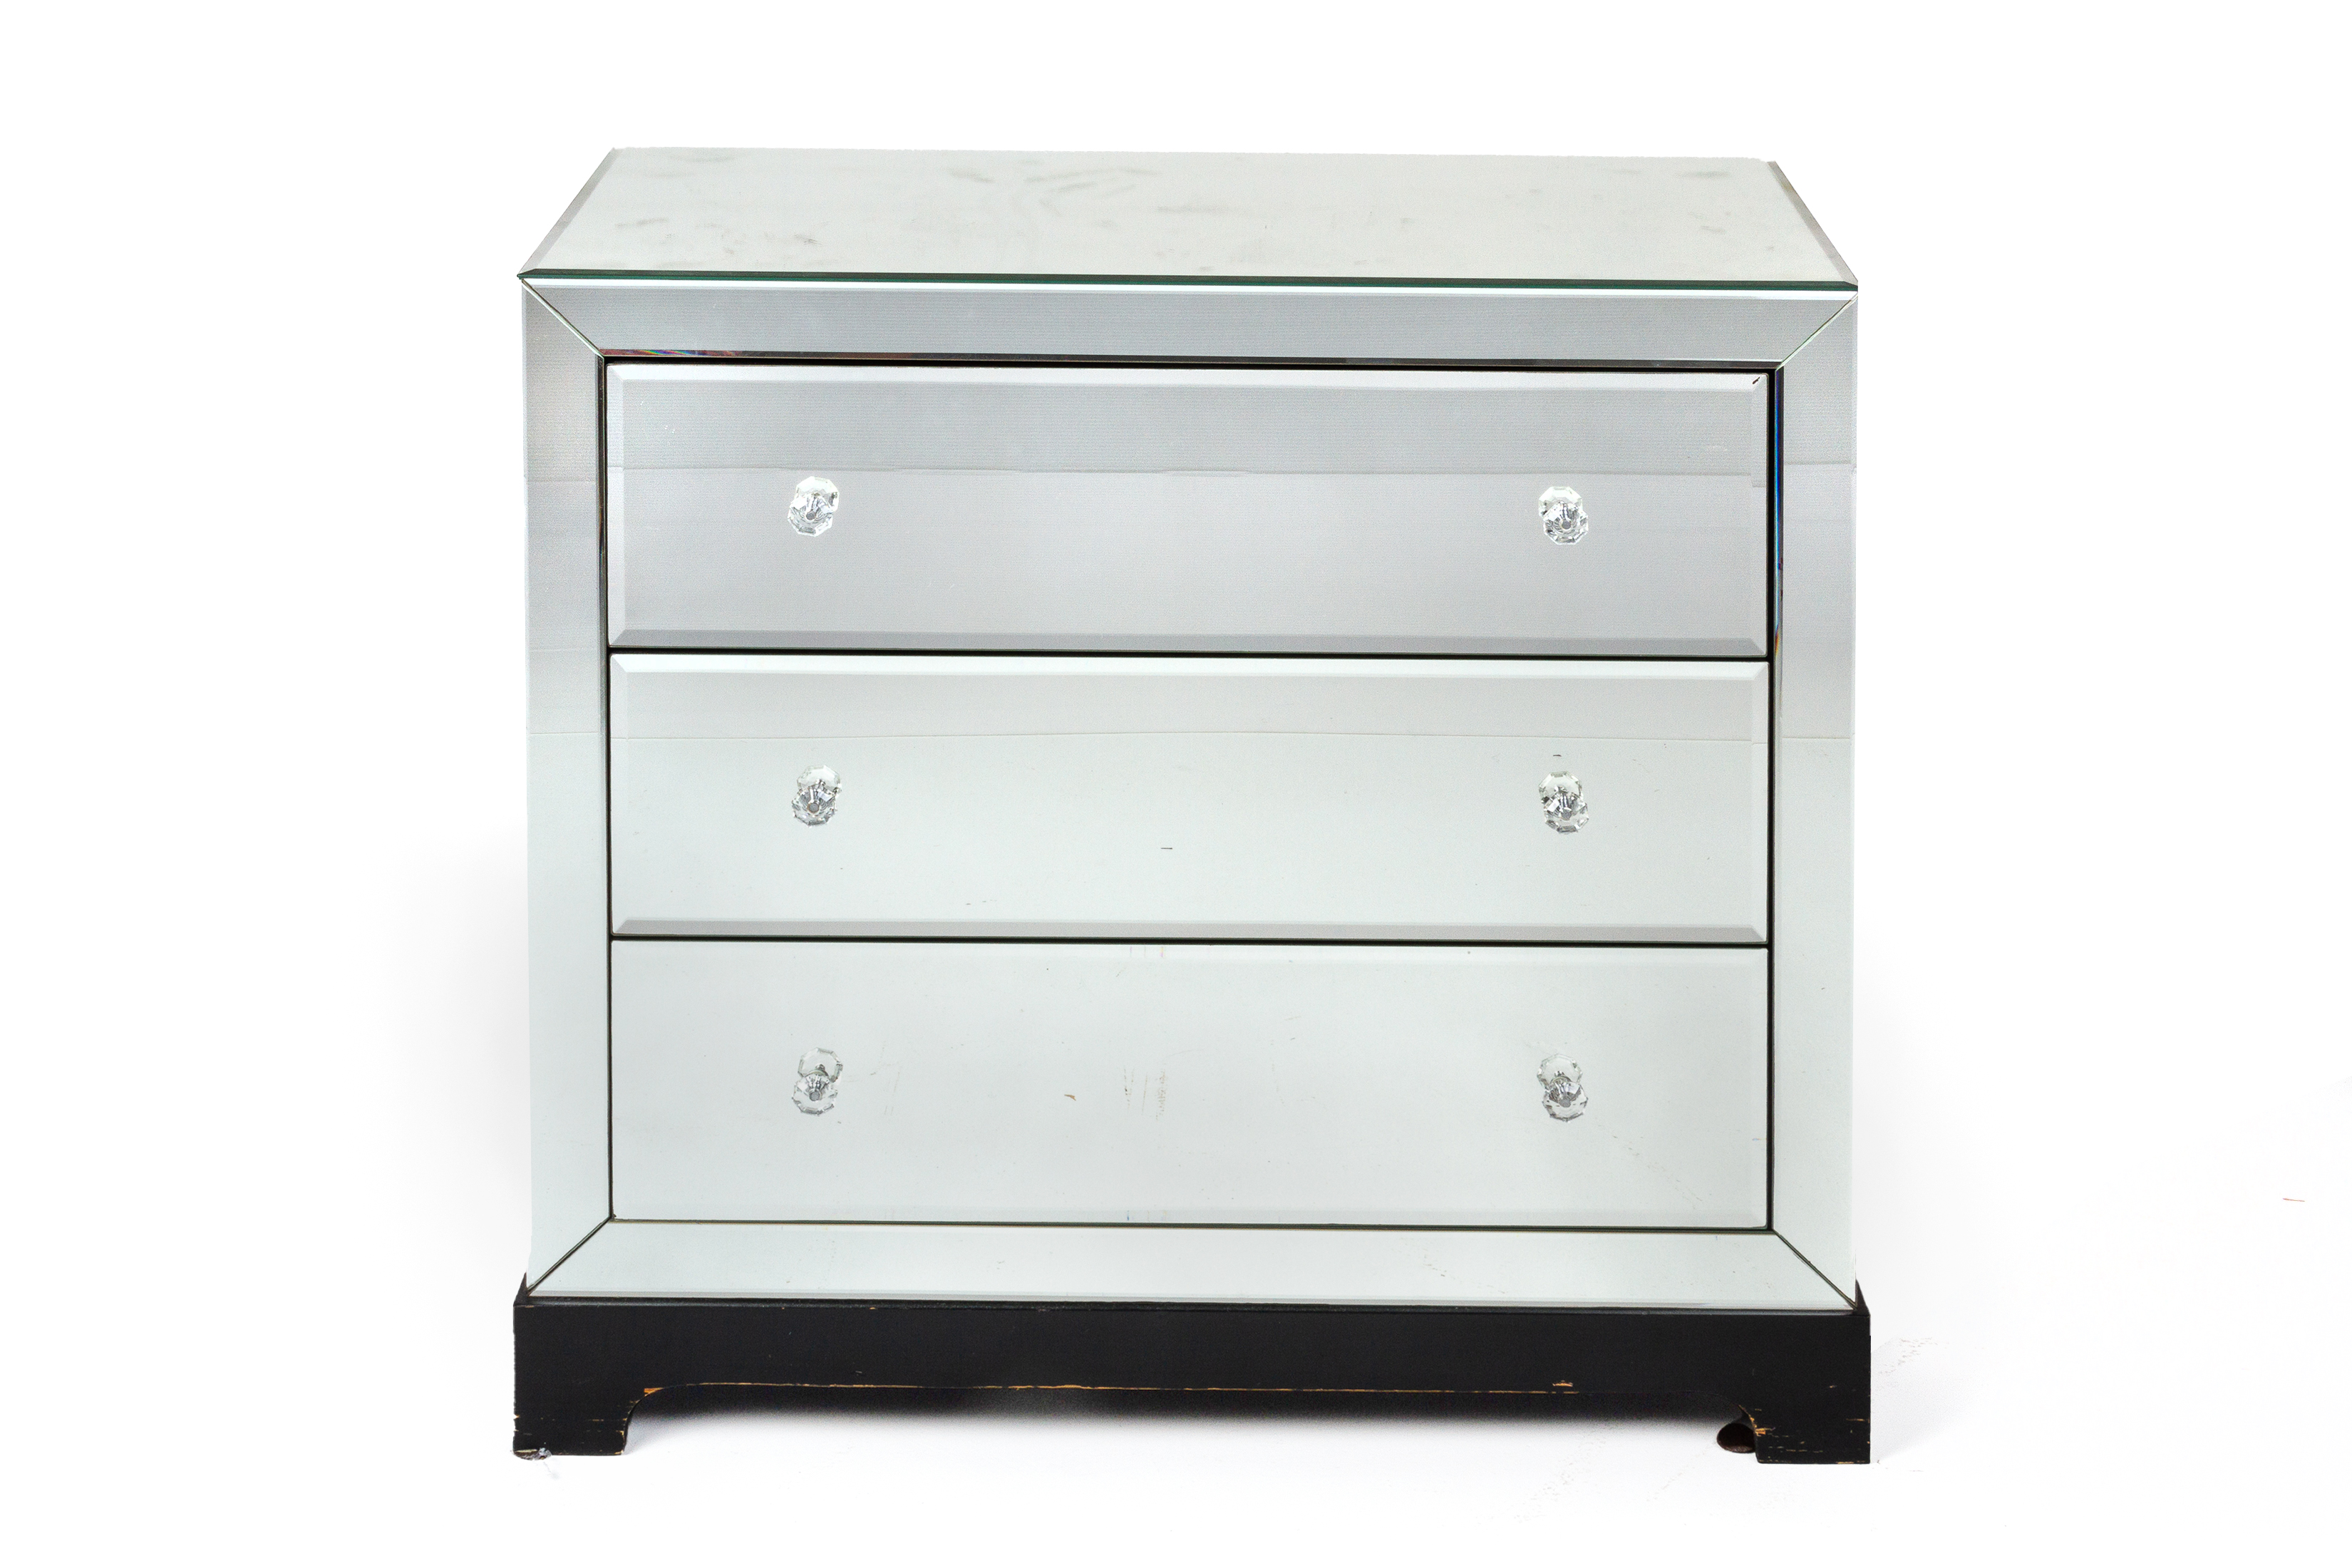 A PAIR OF MIRRORED BEDSIDE CHESTS OF DRAWERS